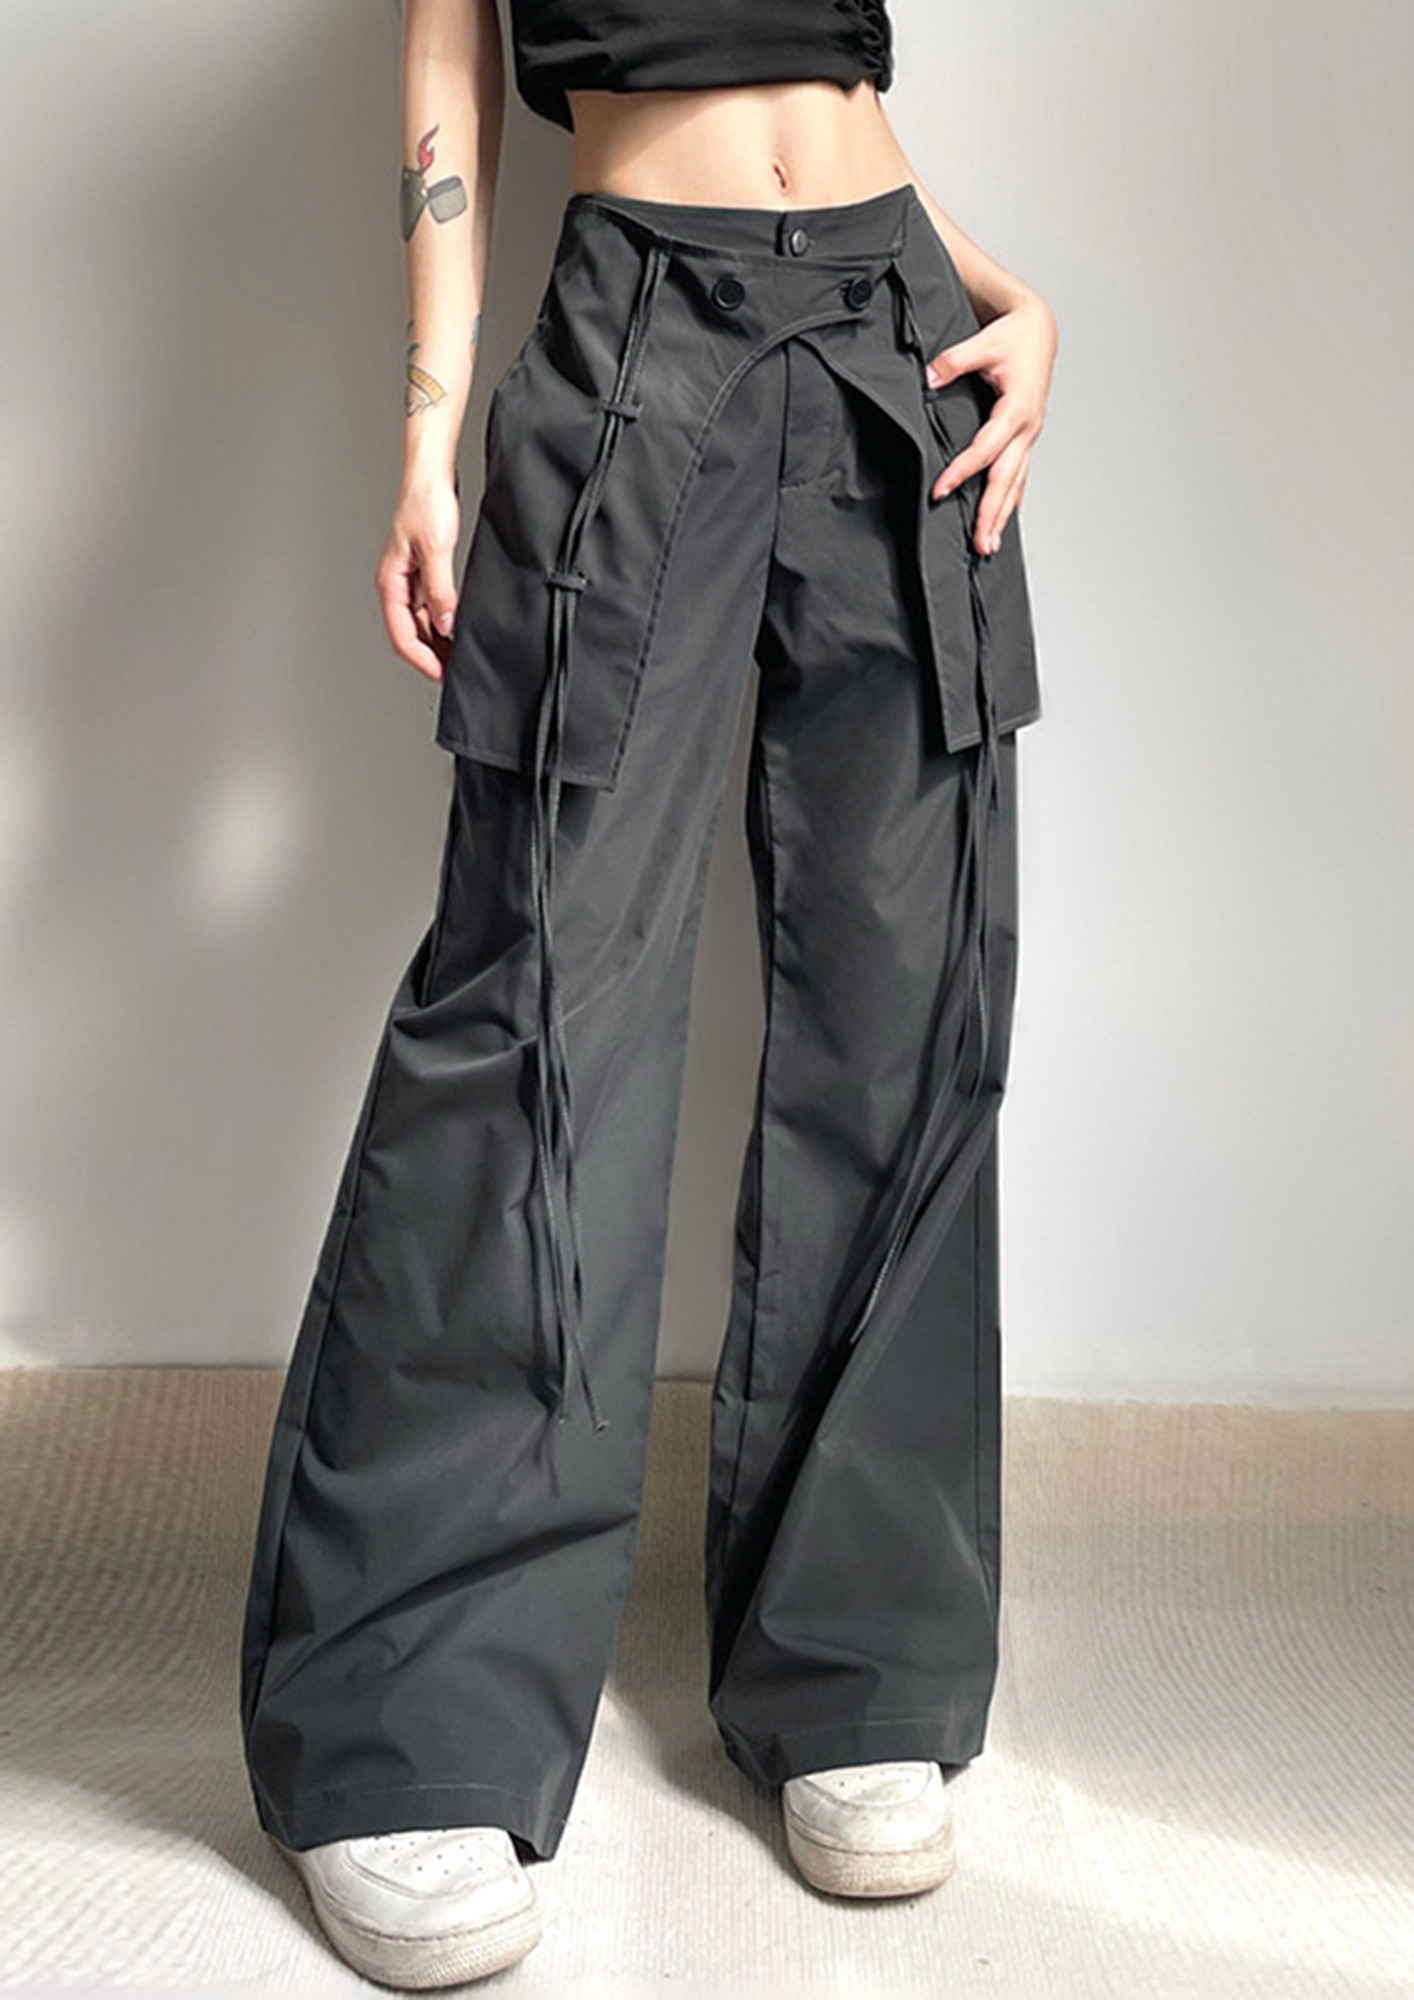 Maeve Low-Slung Trousers | Anthropologie Singapore - Women's Clothing,  Accessories & Home